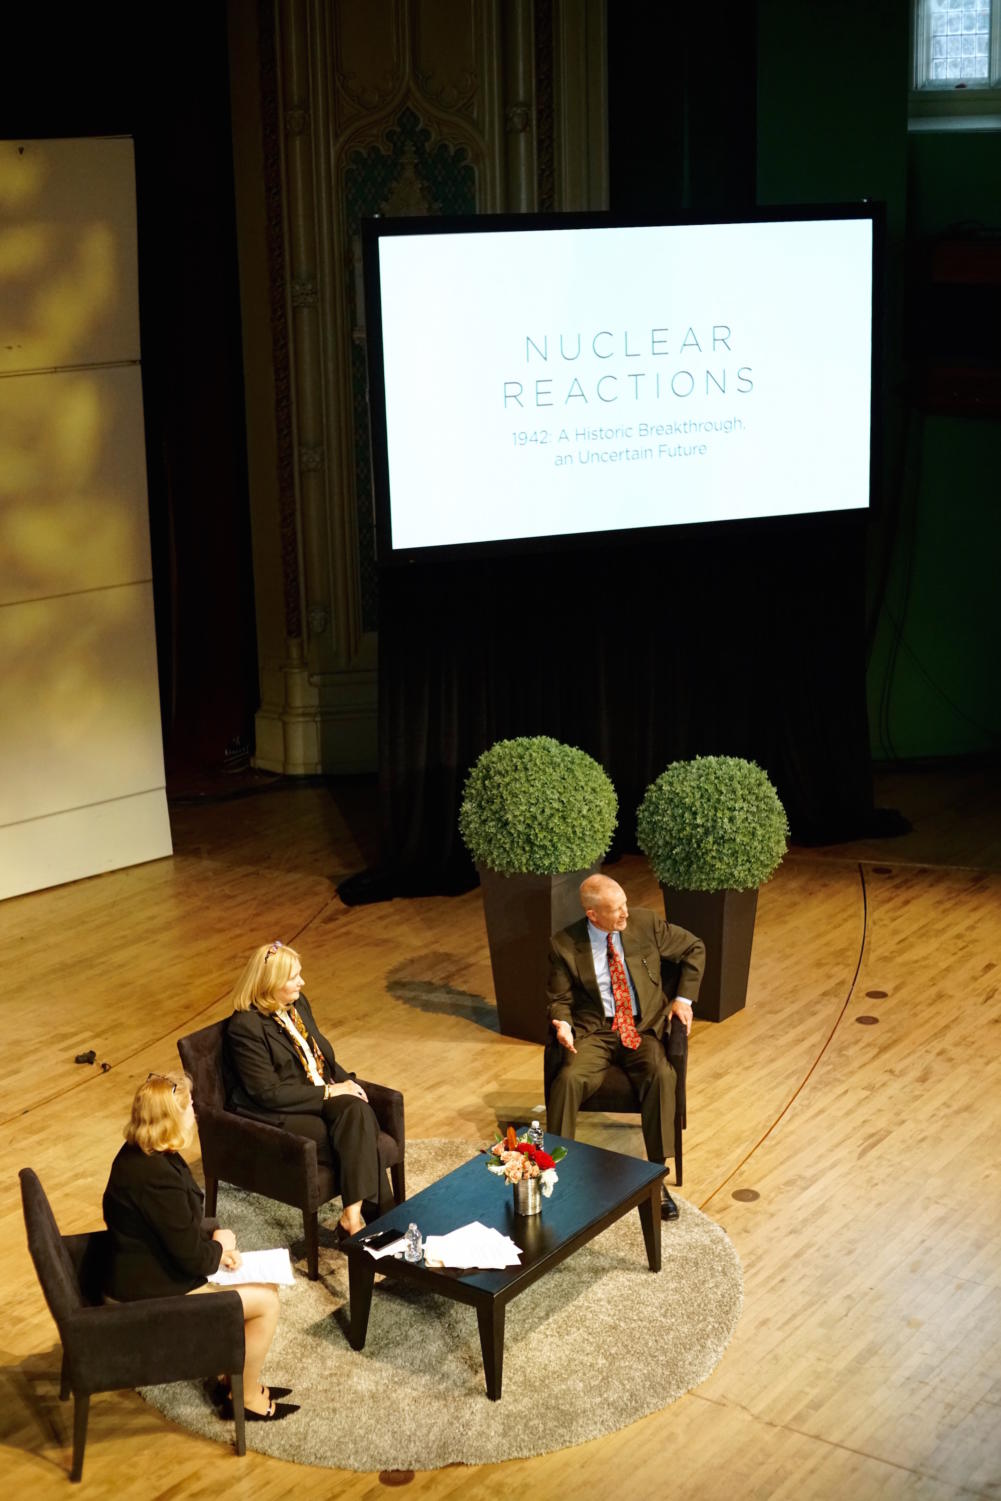 Panelists Dennis Blair, chairman of Sadakawa Peace Foundation USA, and Madelyn Creedon, former Principal Deputy Director National Nuclear Security Administrator, discuss nuclear weapons in the modern world.